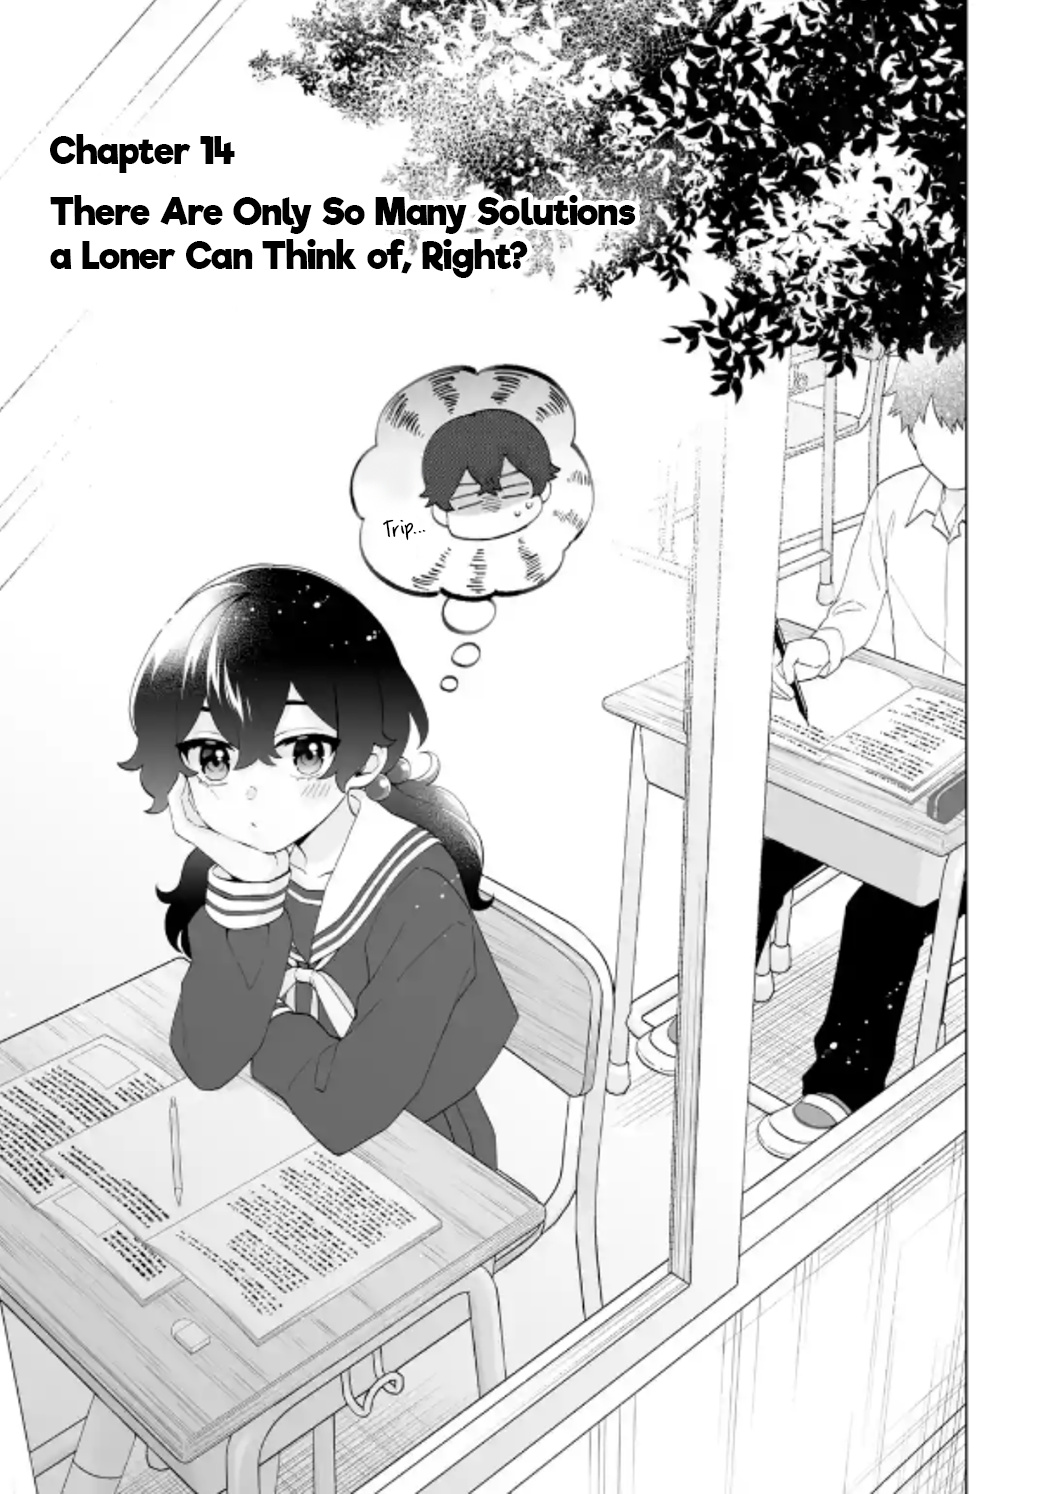 Please Leave Me Alone (For Some Reason, She Wants to Change a Lone Wolf's Helpless High School Life.) Chapter 14